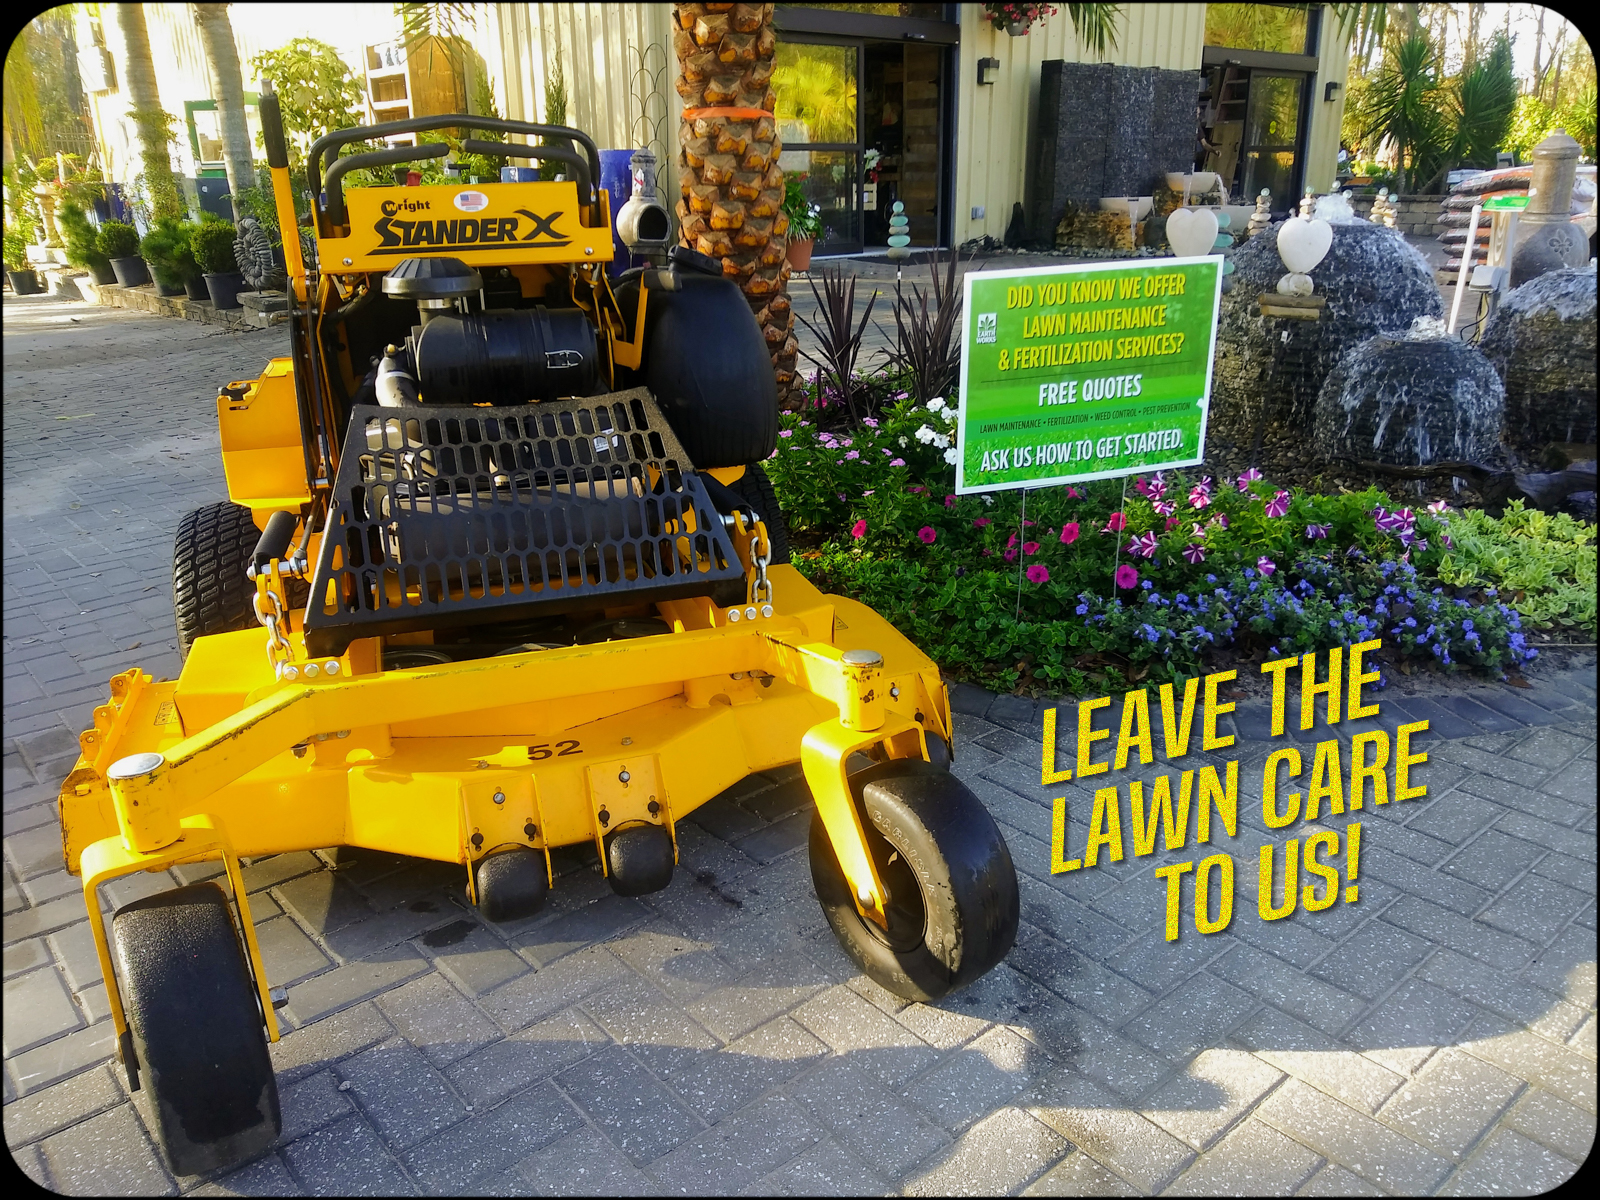 Earth Works Jax Lawn Care and Landscaping